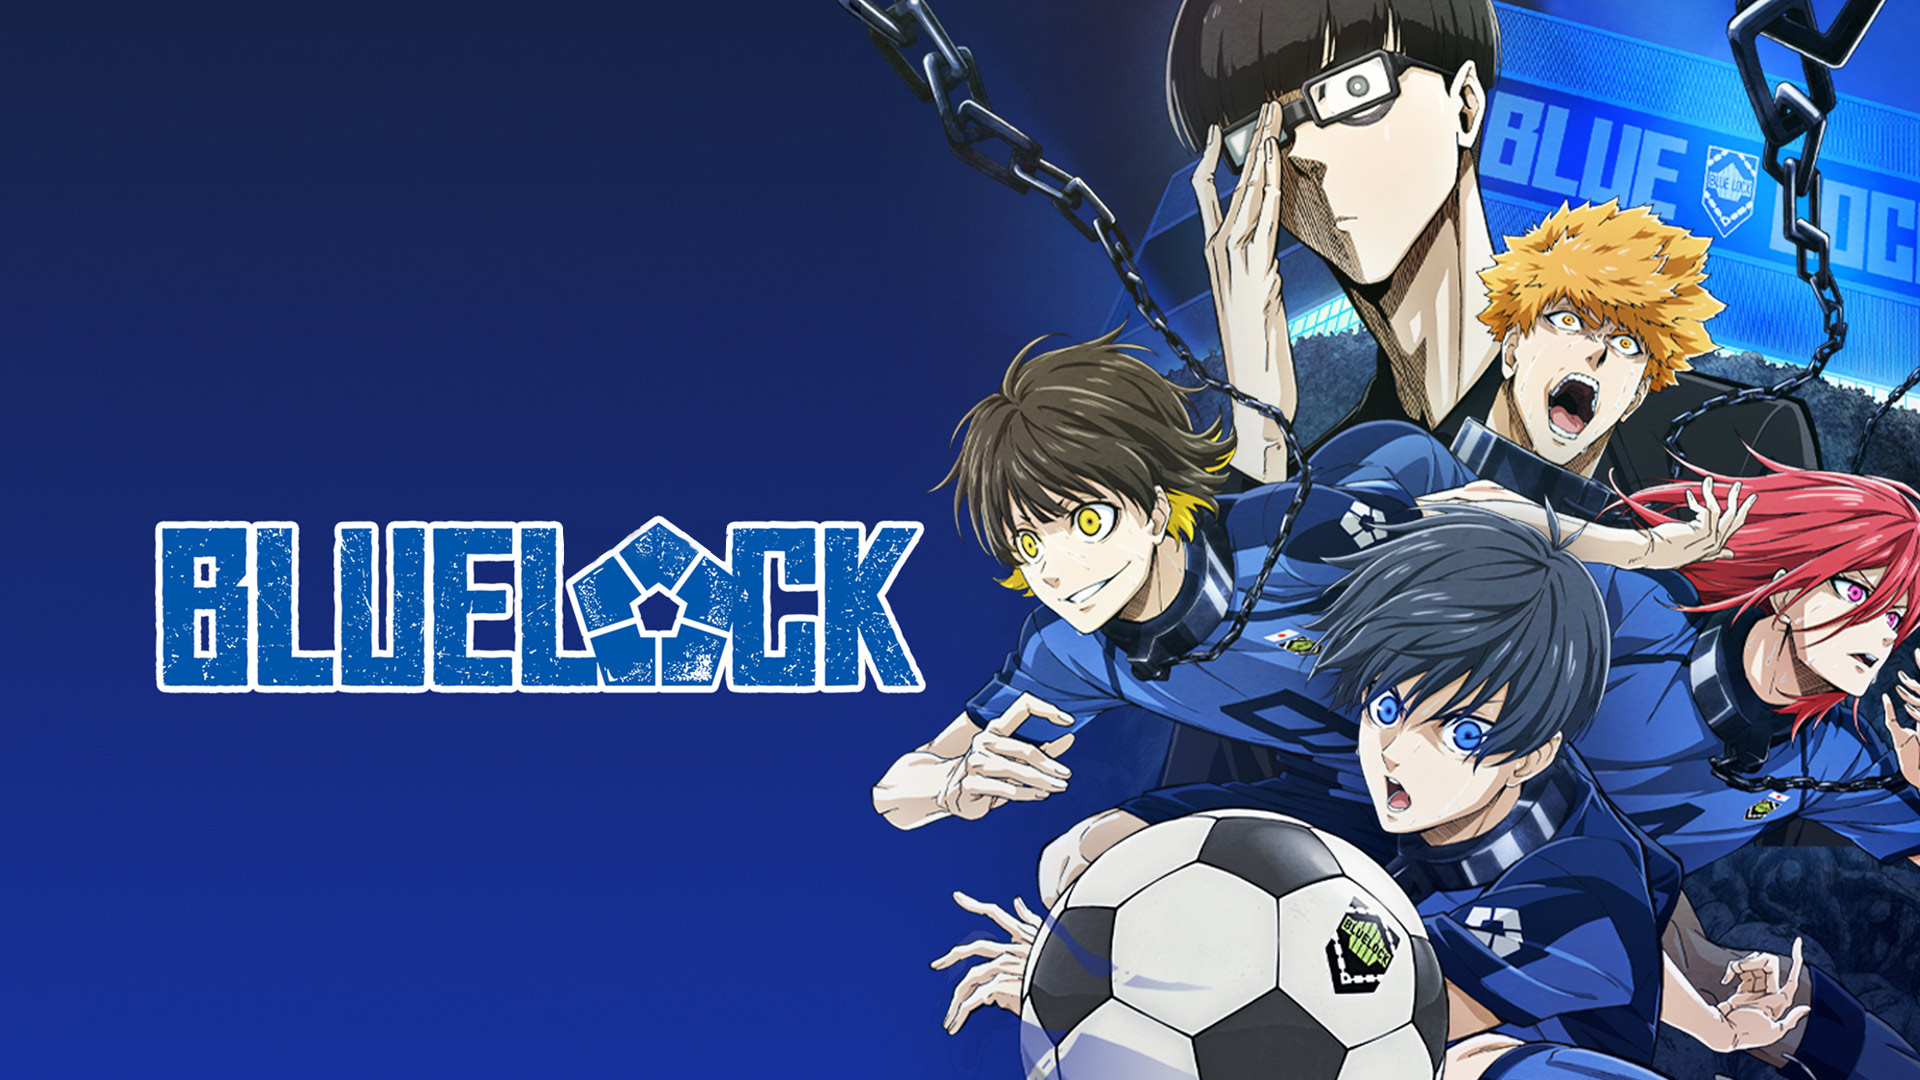 Where to Watch Blue Lock?